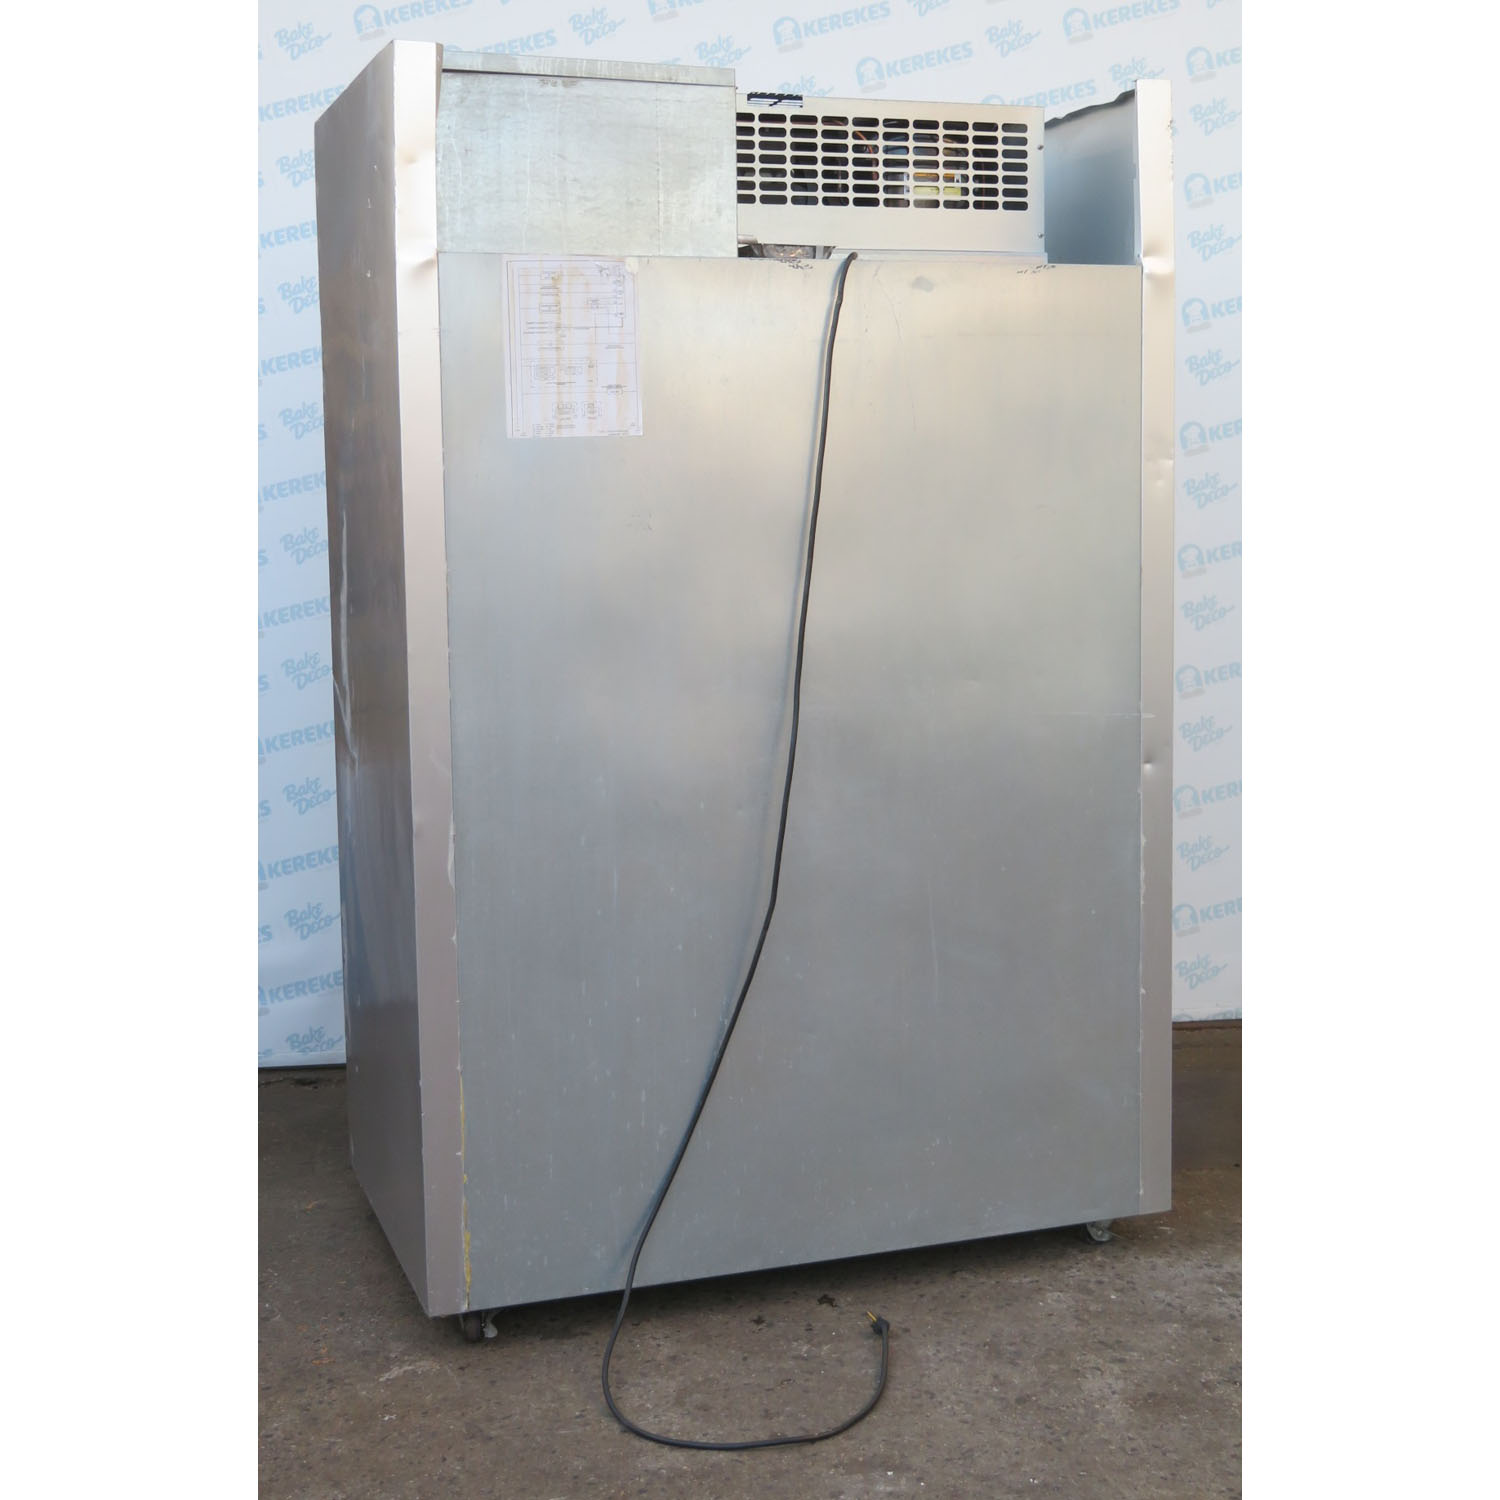 Traulsen G22010 Freezer, Used Very Good Condition image 4